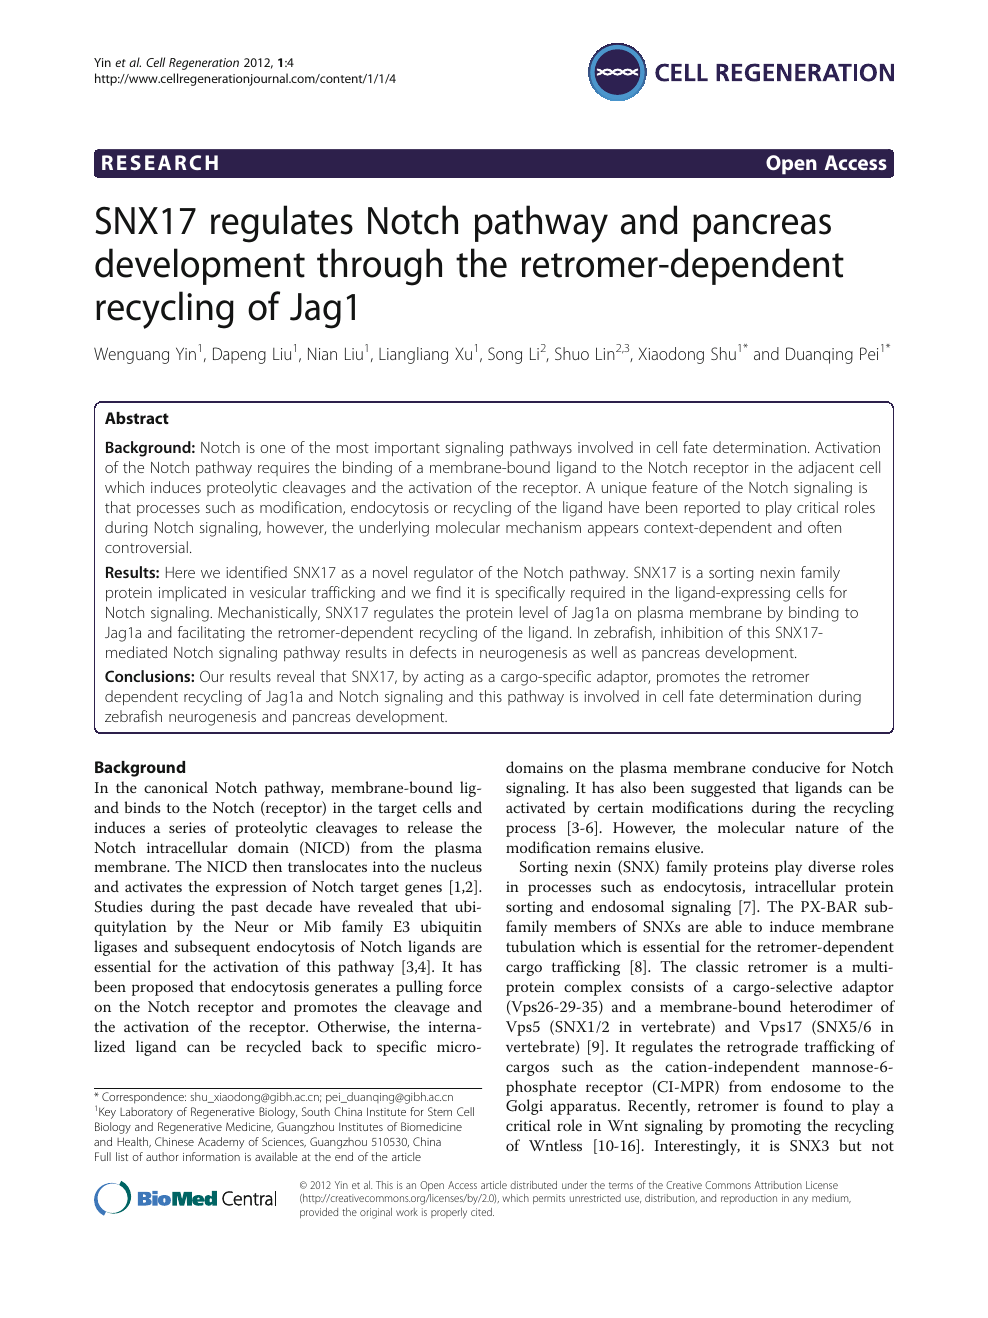 Snx17 Regulates Notch Pathway And Pancreas Development Through The Retromer Dependent Recycling Of Jag1 Topic Of Research Paper In Biological Sciences Download Scholarly Article Pdf And Read For Free On Cyberleninka Open